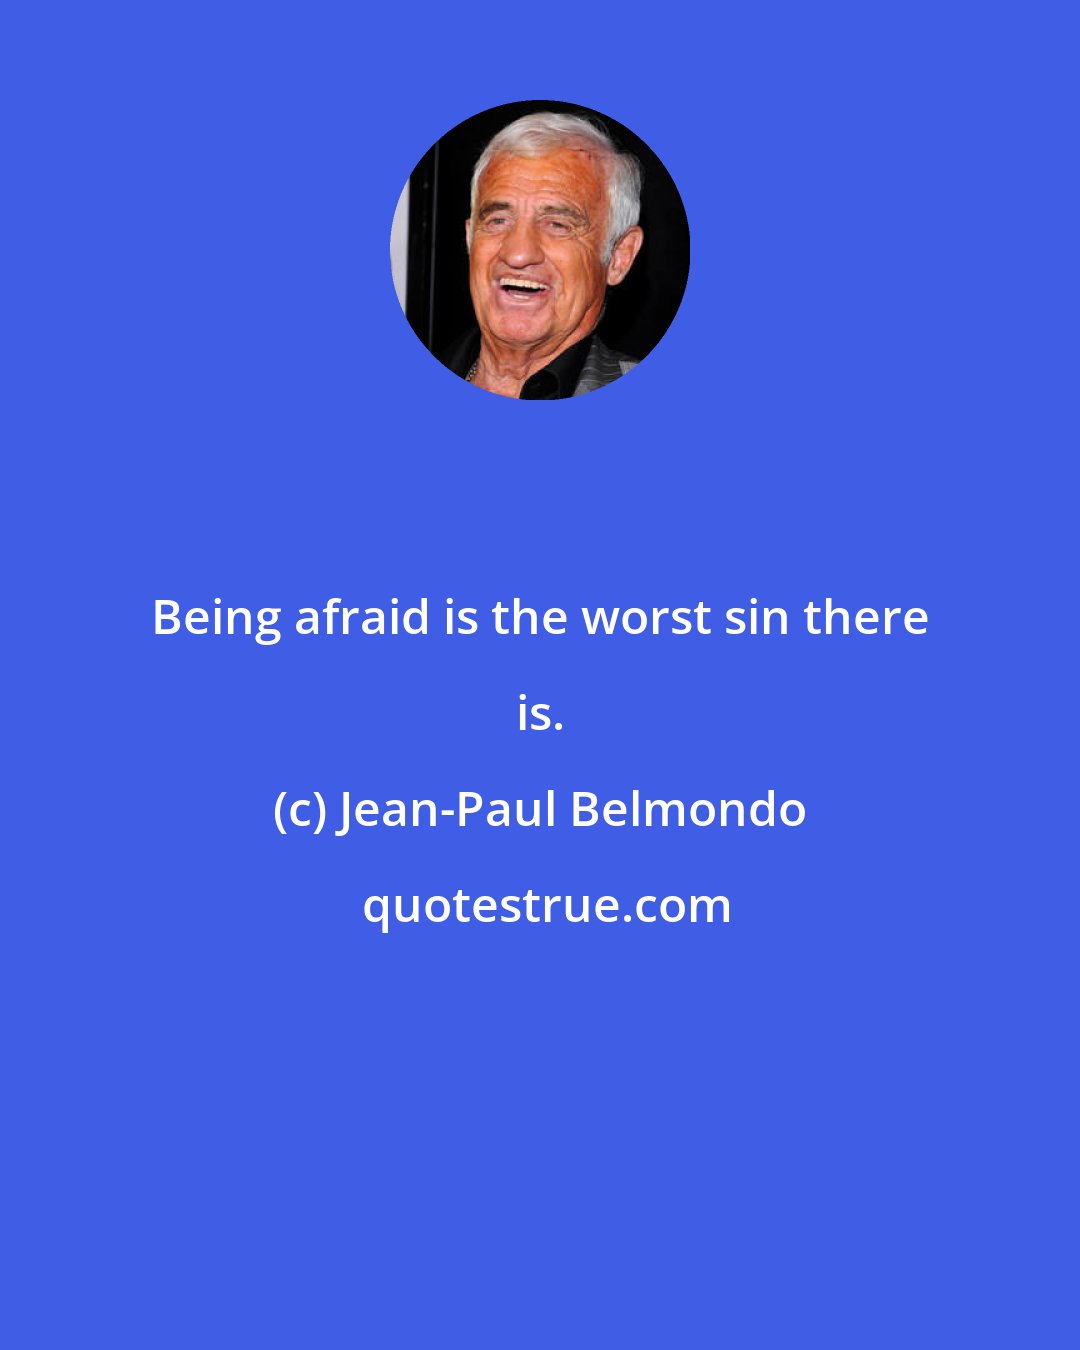 Jean-Paul Belmondo: Being afraid is the worst sin there is.